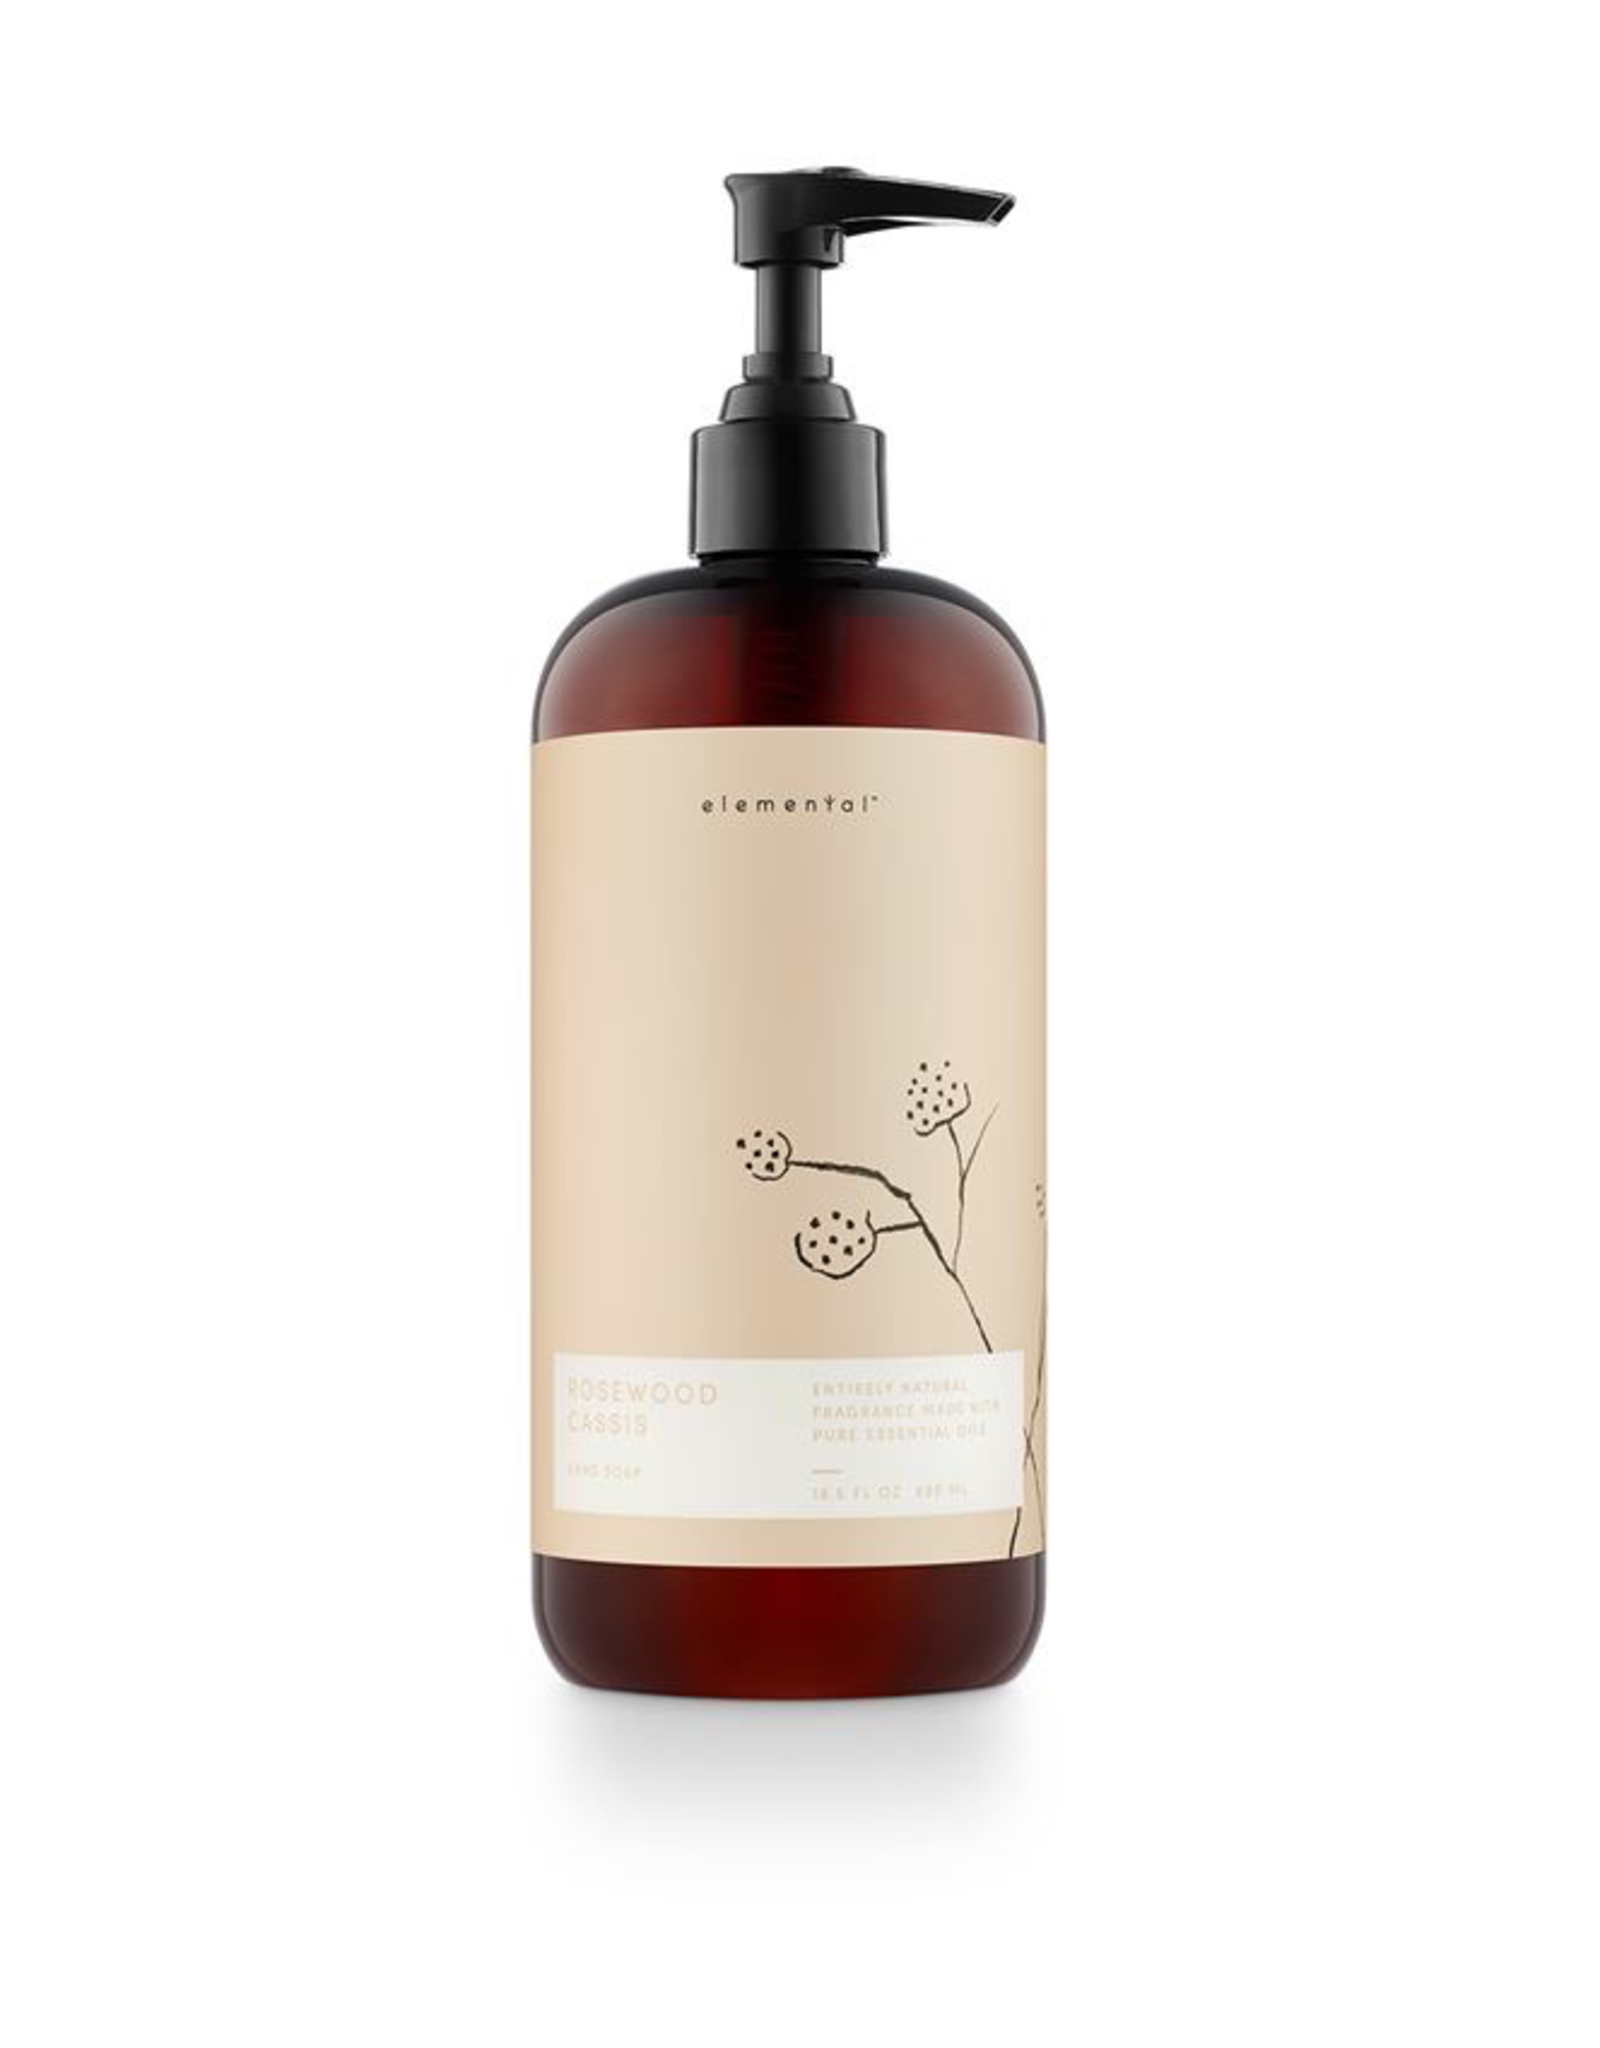 Rosewood Cassis Hand Soap